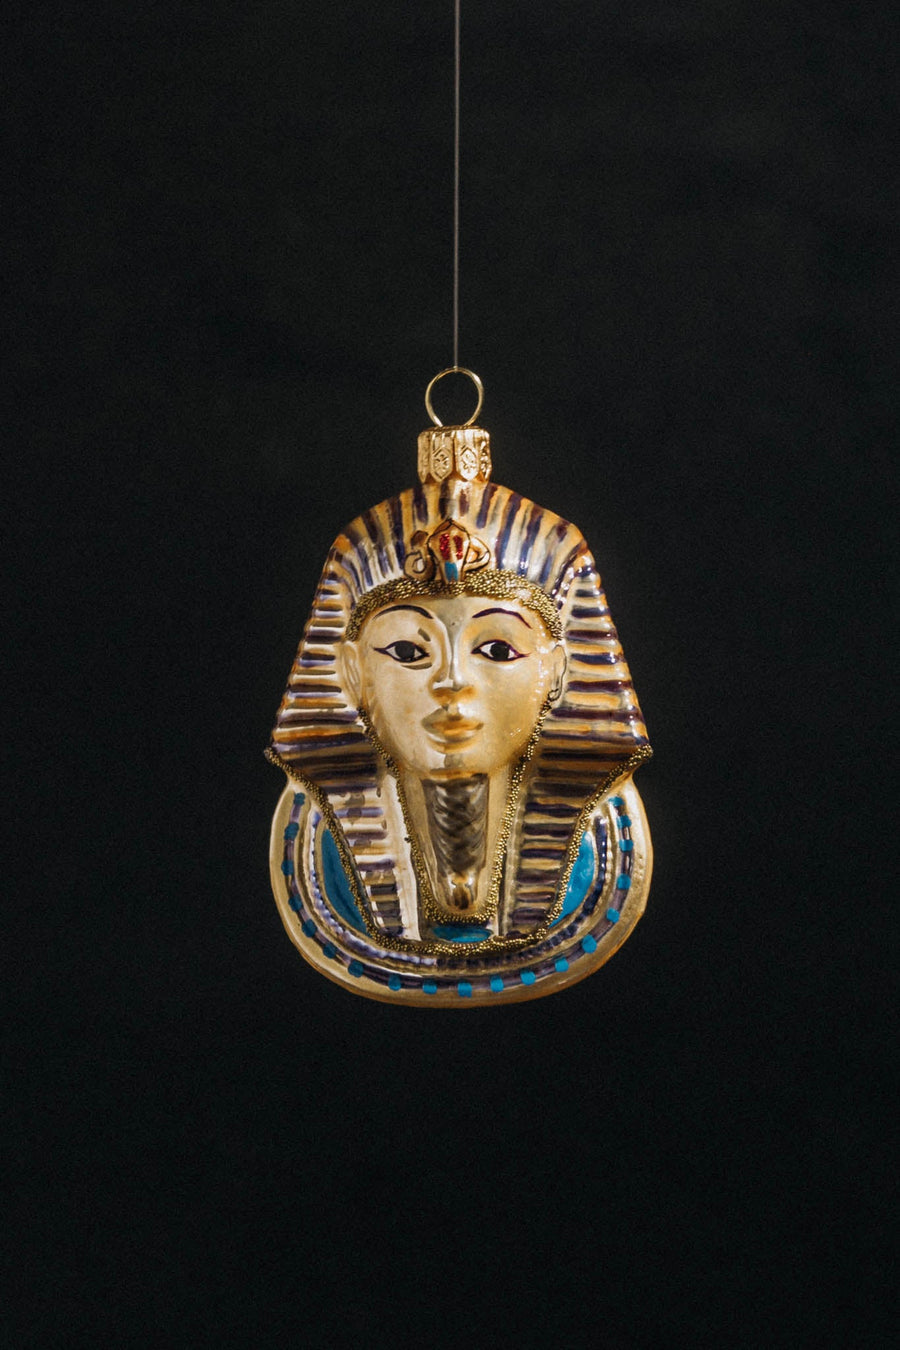 Child of Wild King Tut Ancient Treasures Egyptian Ornaments